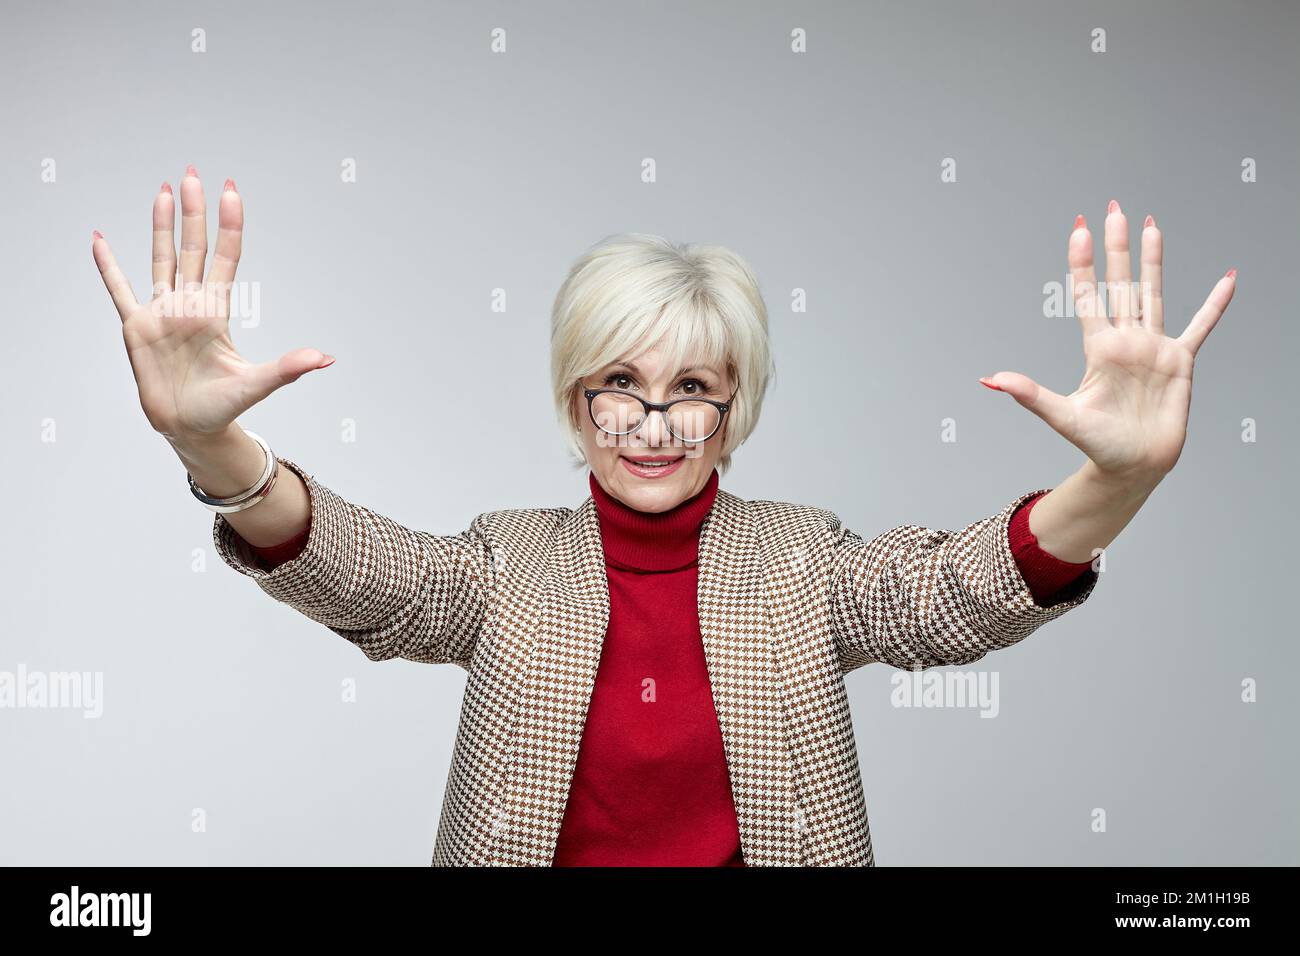 beautiful elderly woman with glasses holds her hands in front of her with open palms facing the camera. advertising concept of a business woman leader Stock Photo